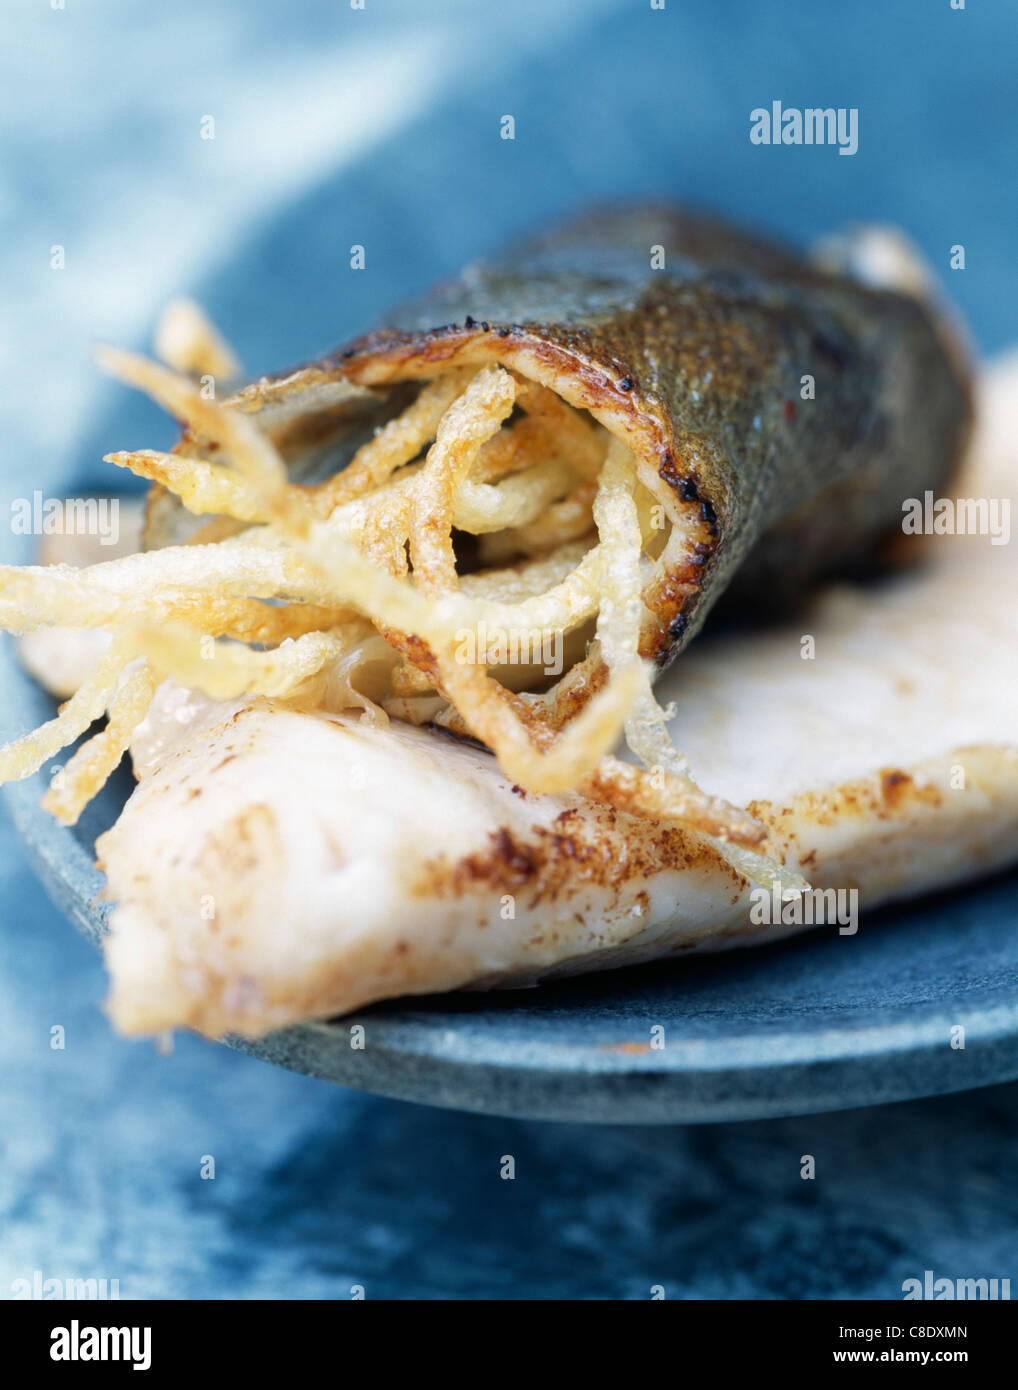 Pan-fried turbot fillet with fried onions Stock Photo